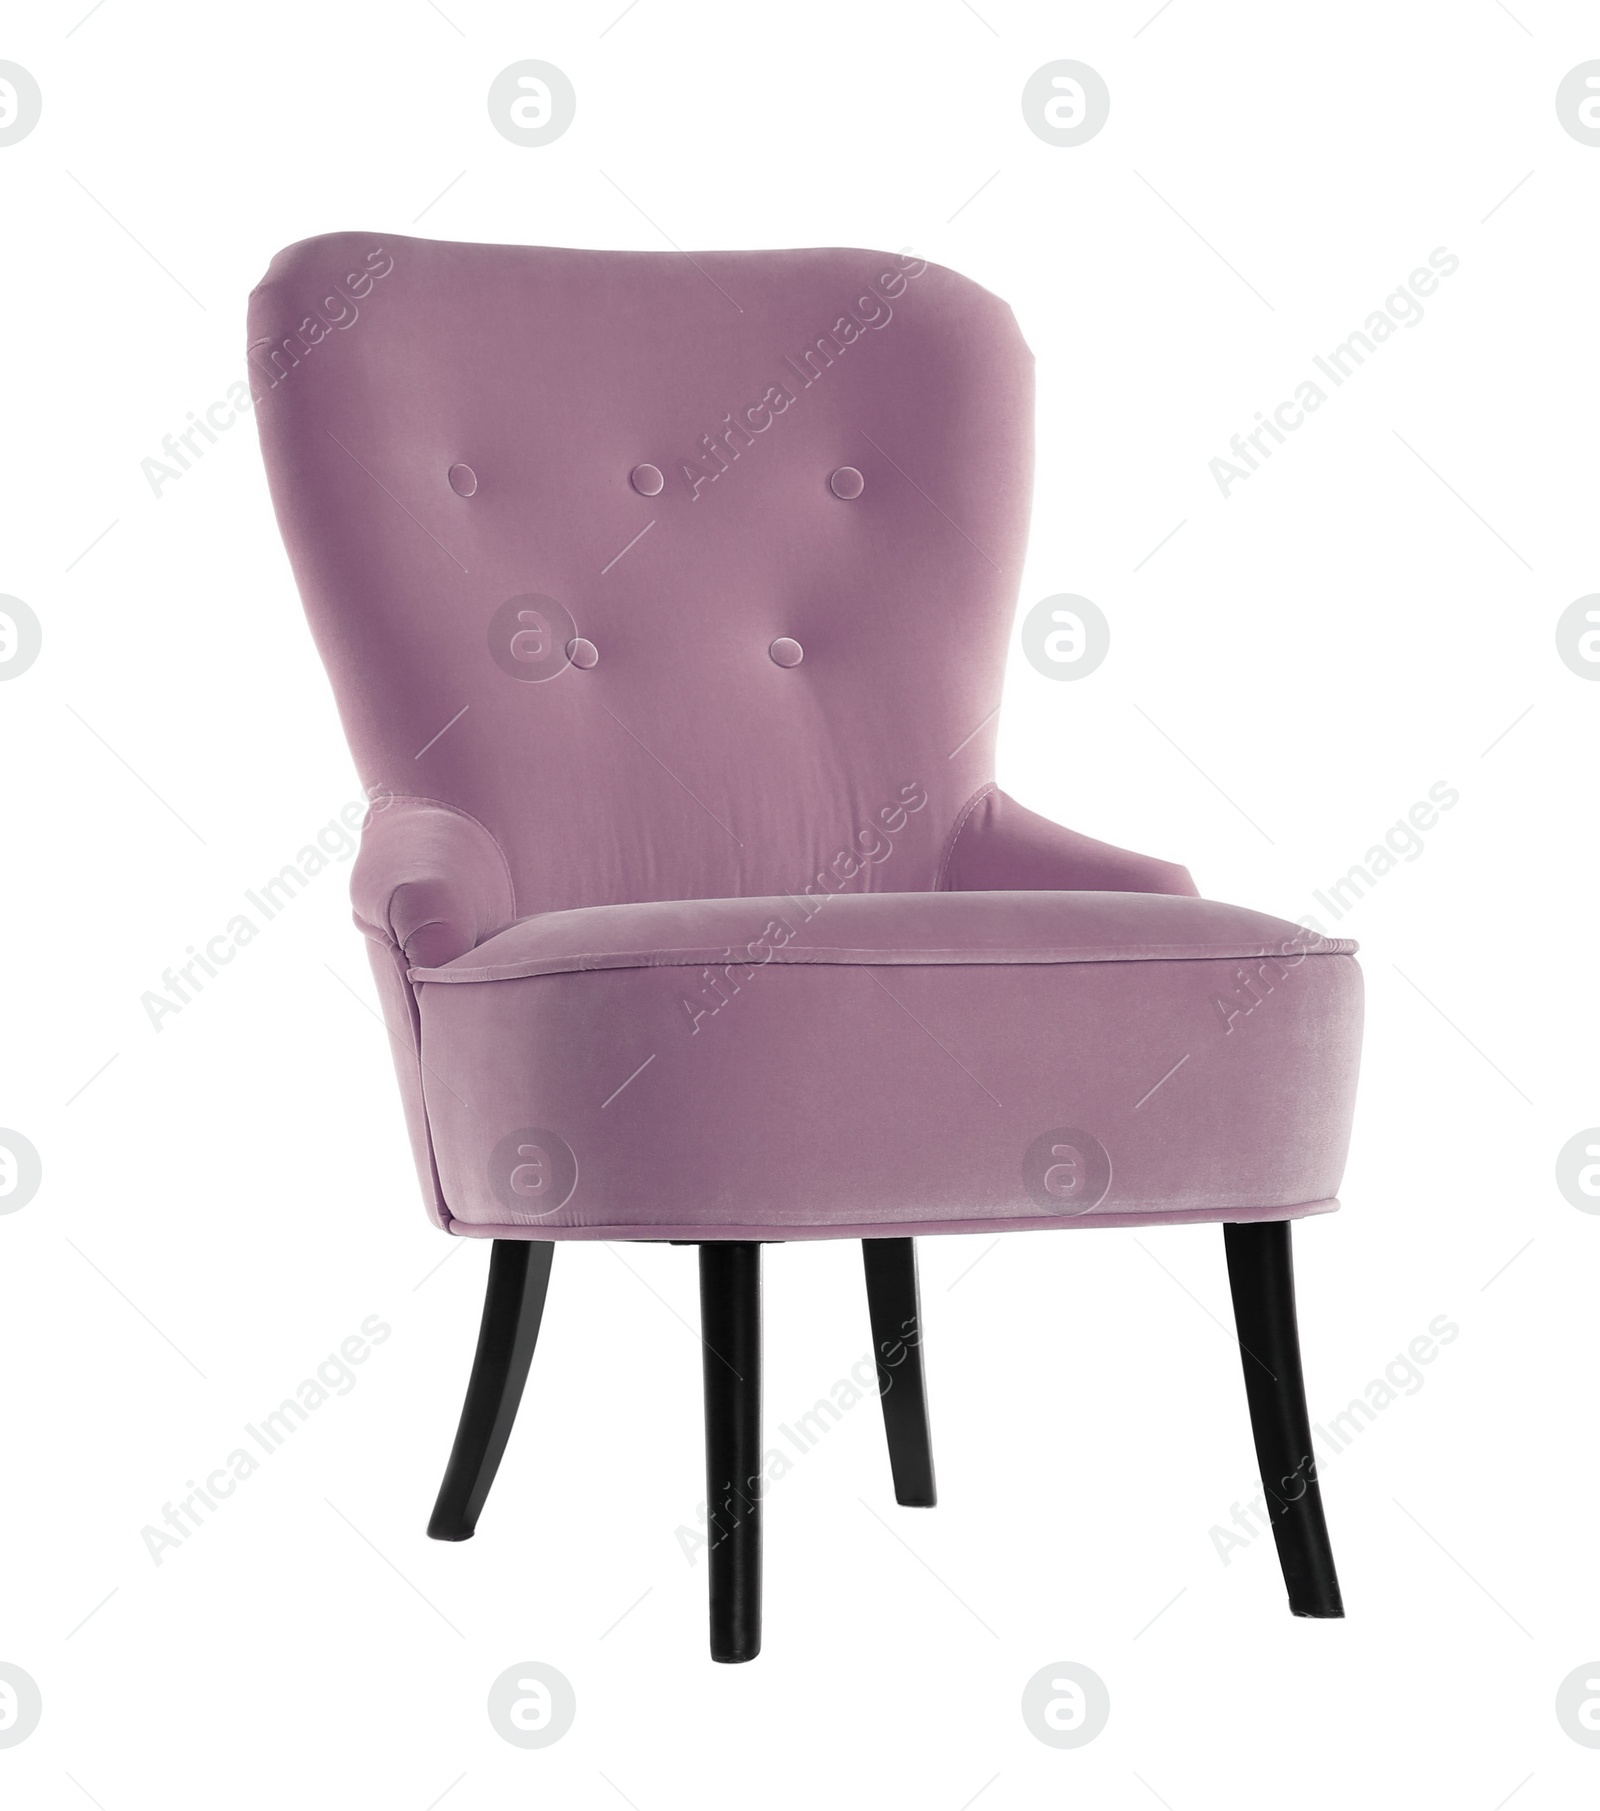 Image of One comfortable lilac color armchair isolated on white